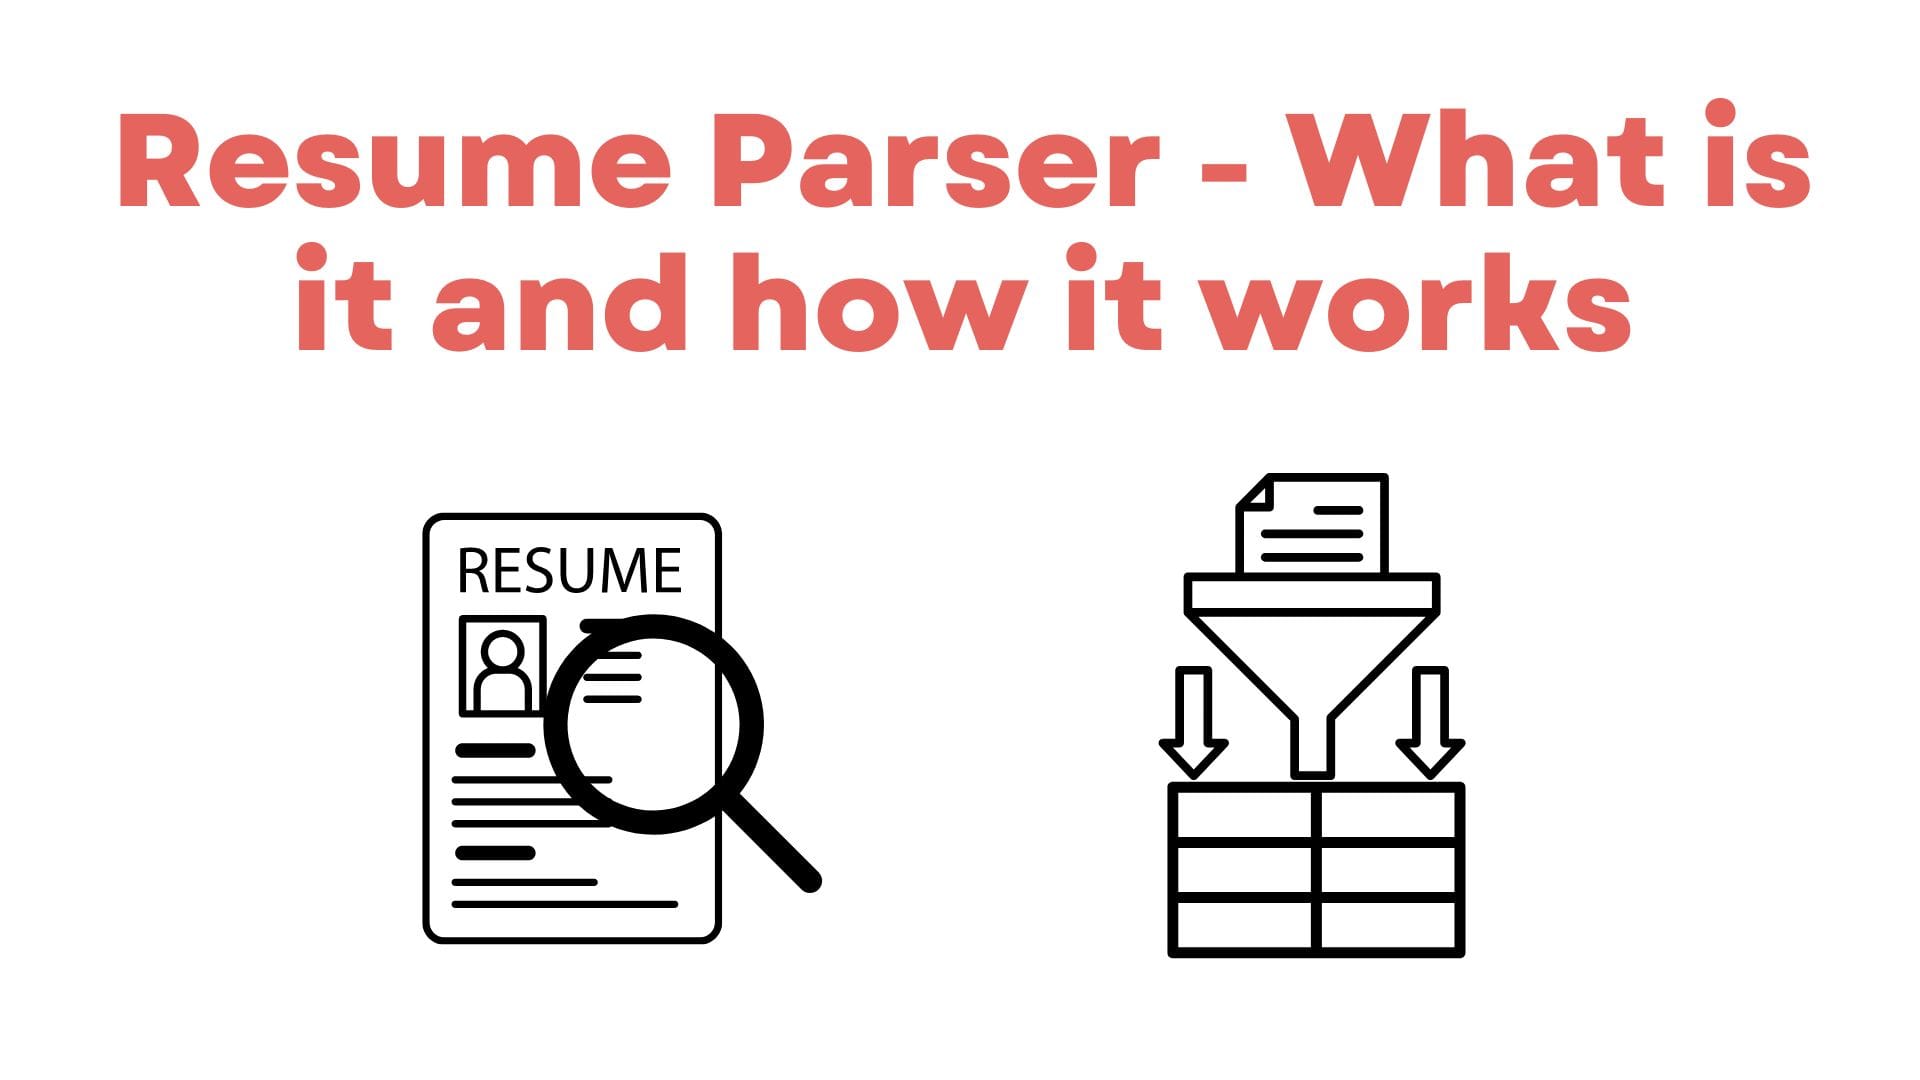 Resume Parser - What is it and how it works